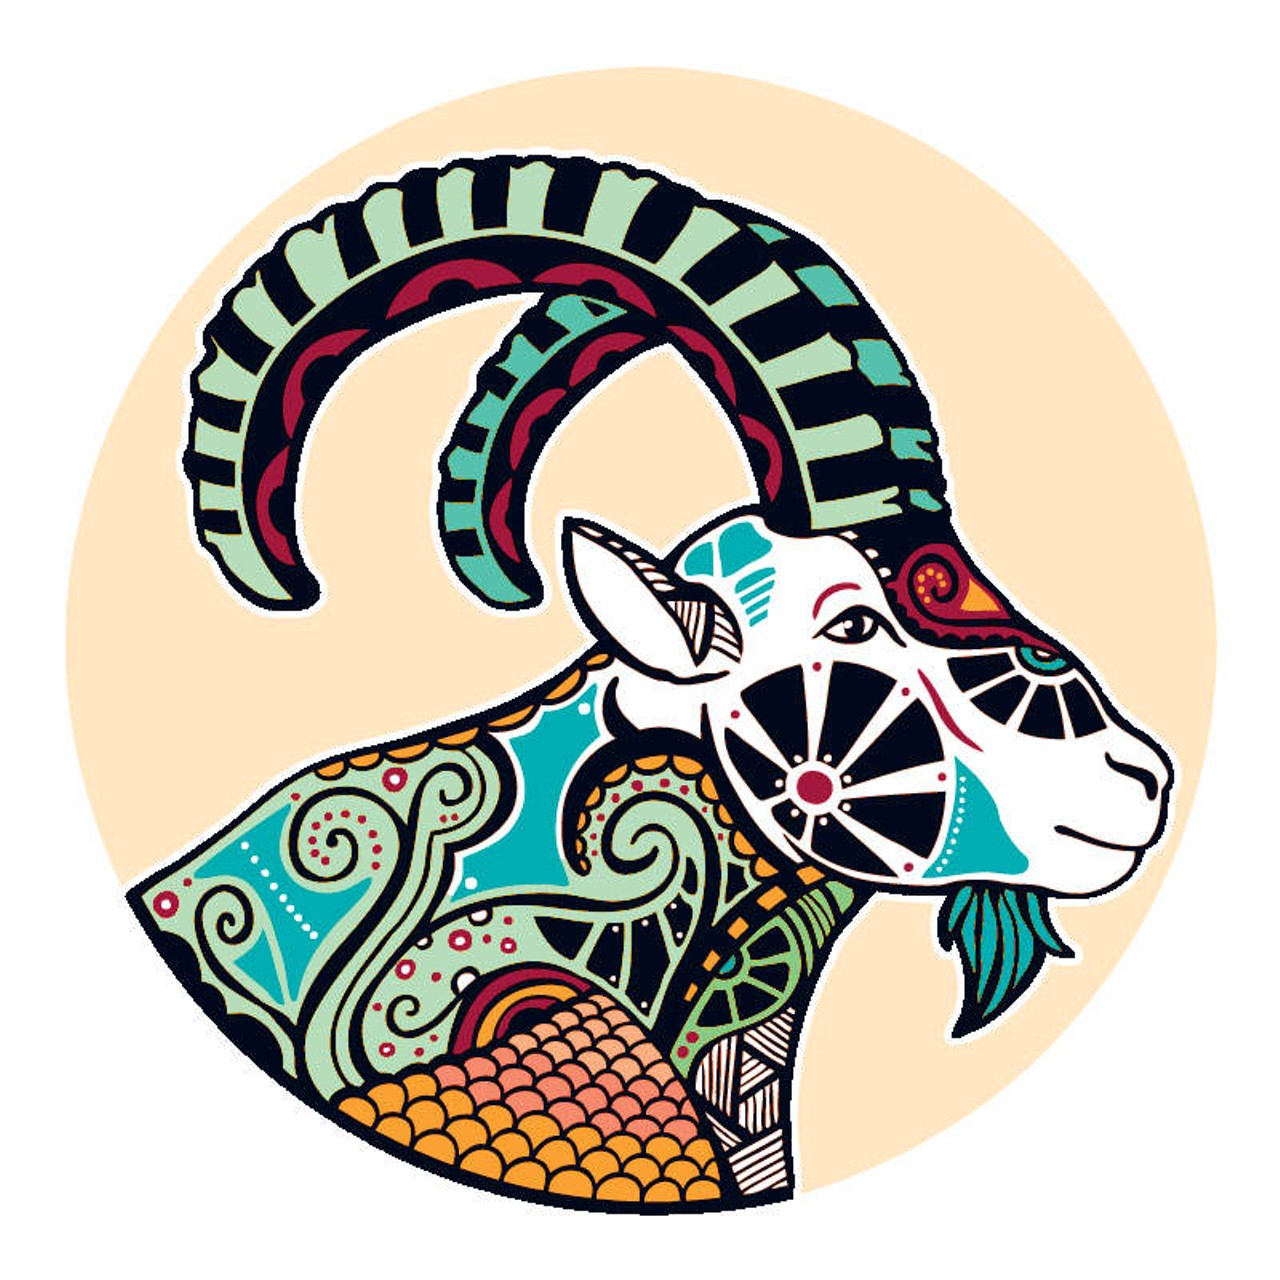 CAPRICORN: December 21 - January 20
Being called on the carpet by people who don't know who they're dealing with, could be a theme for many of you. If that is the case, the stuff that gives you the capacity to get around anything has given you the upper hand. How things unravel depends upon the extent to which you have been misled. Others are not what they appear. Time will reveal their true colors. Those to whom none of this applies are being courted by forces that appear to be totally benign. Their hidden agenda won't work for you, or them. Just because you are being treated like royalty, don't be taken in.